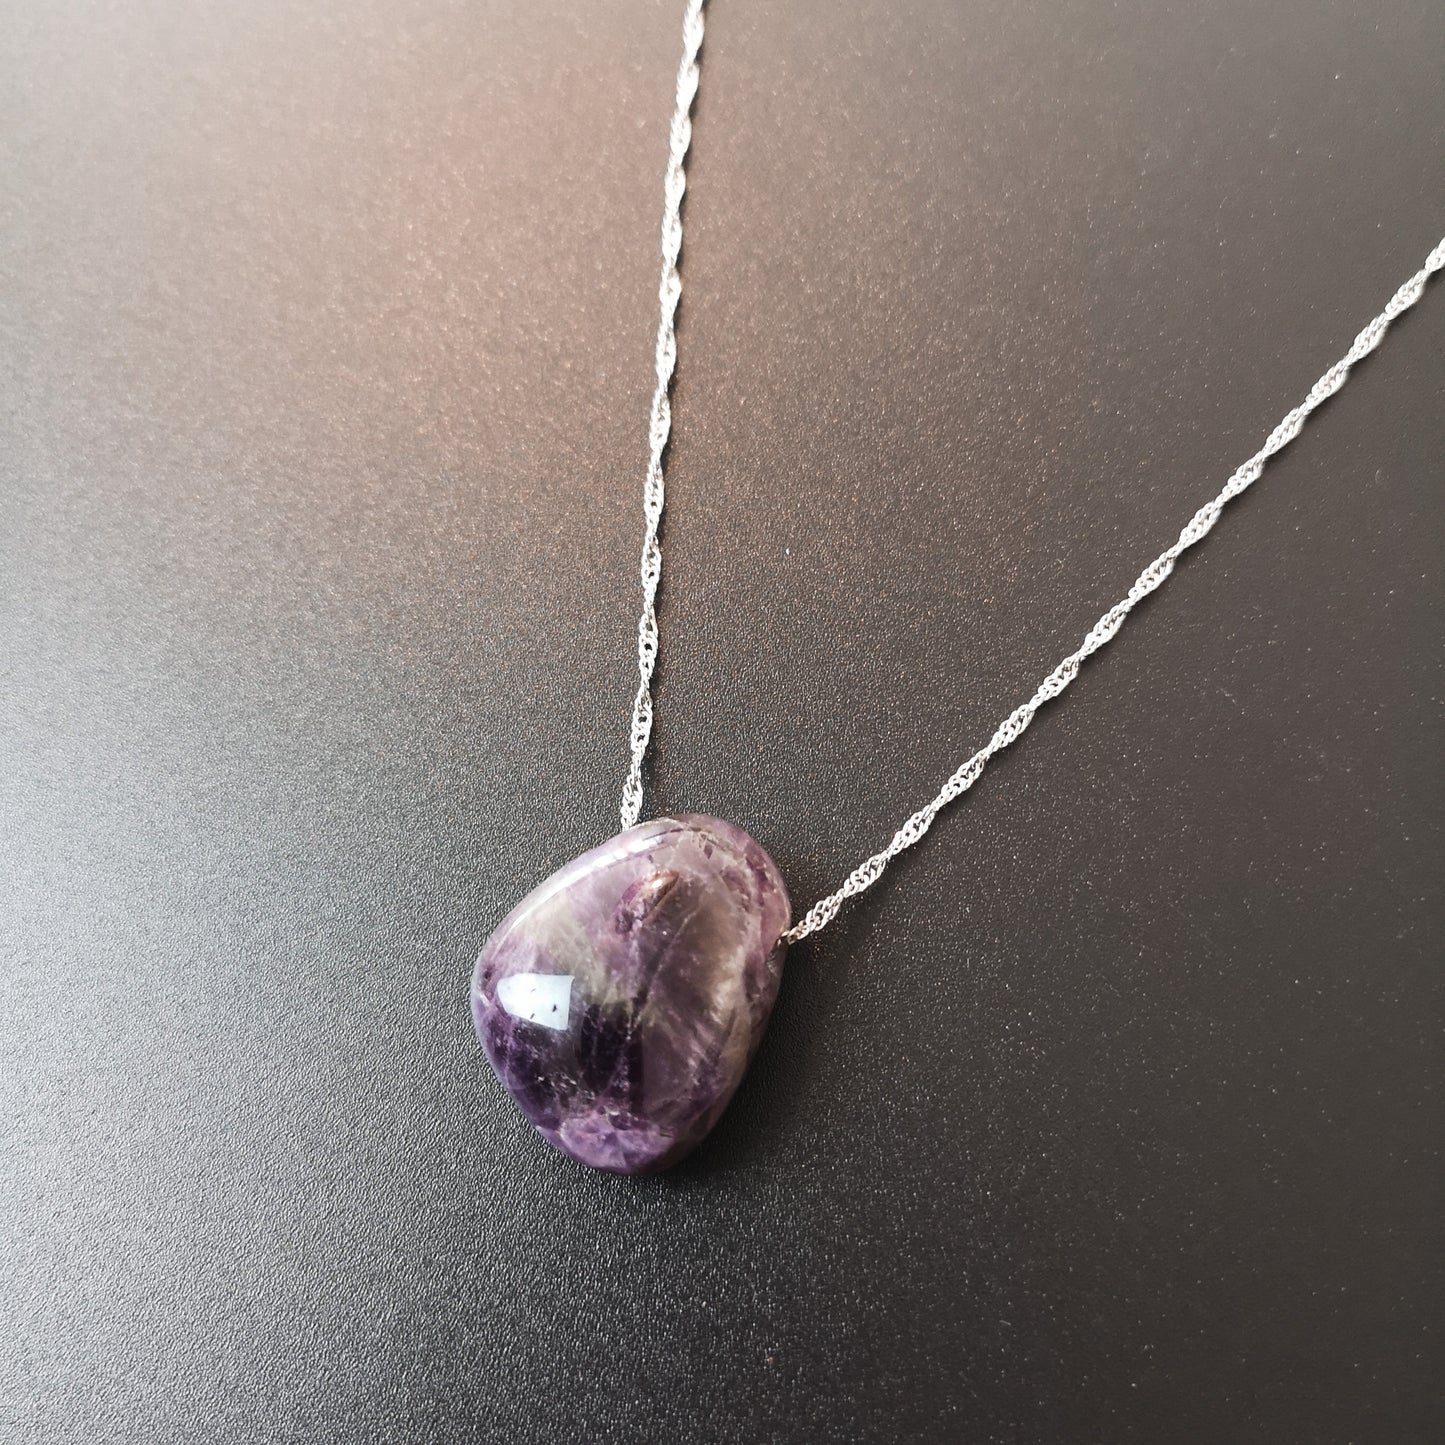 Amethyst gemstone lithotherapy necklace - The French Witch shop